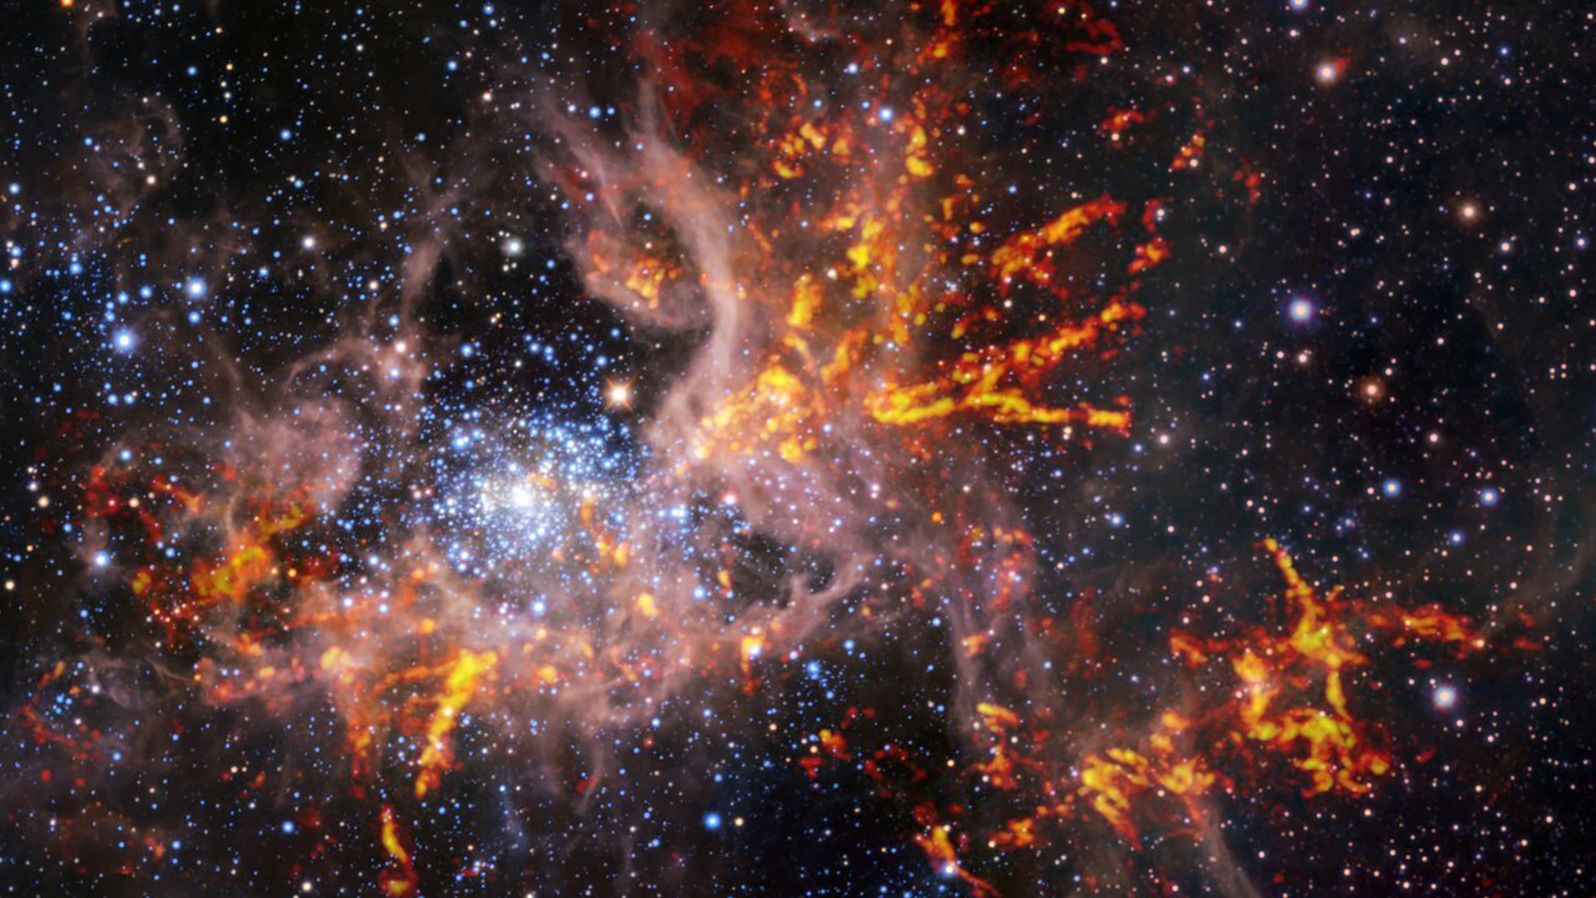 This composite image shows the Tarantula Nebula. The unique weblike structure of the gas clouds led astronomers to the nebula's spidery nickname.